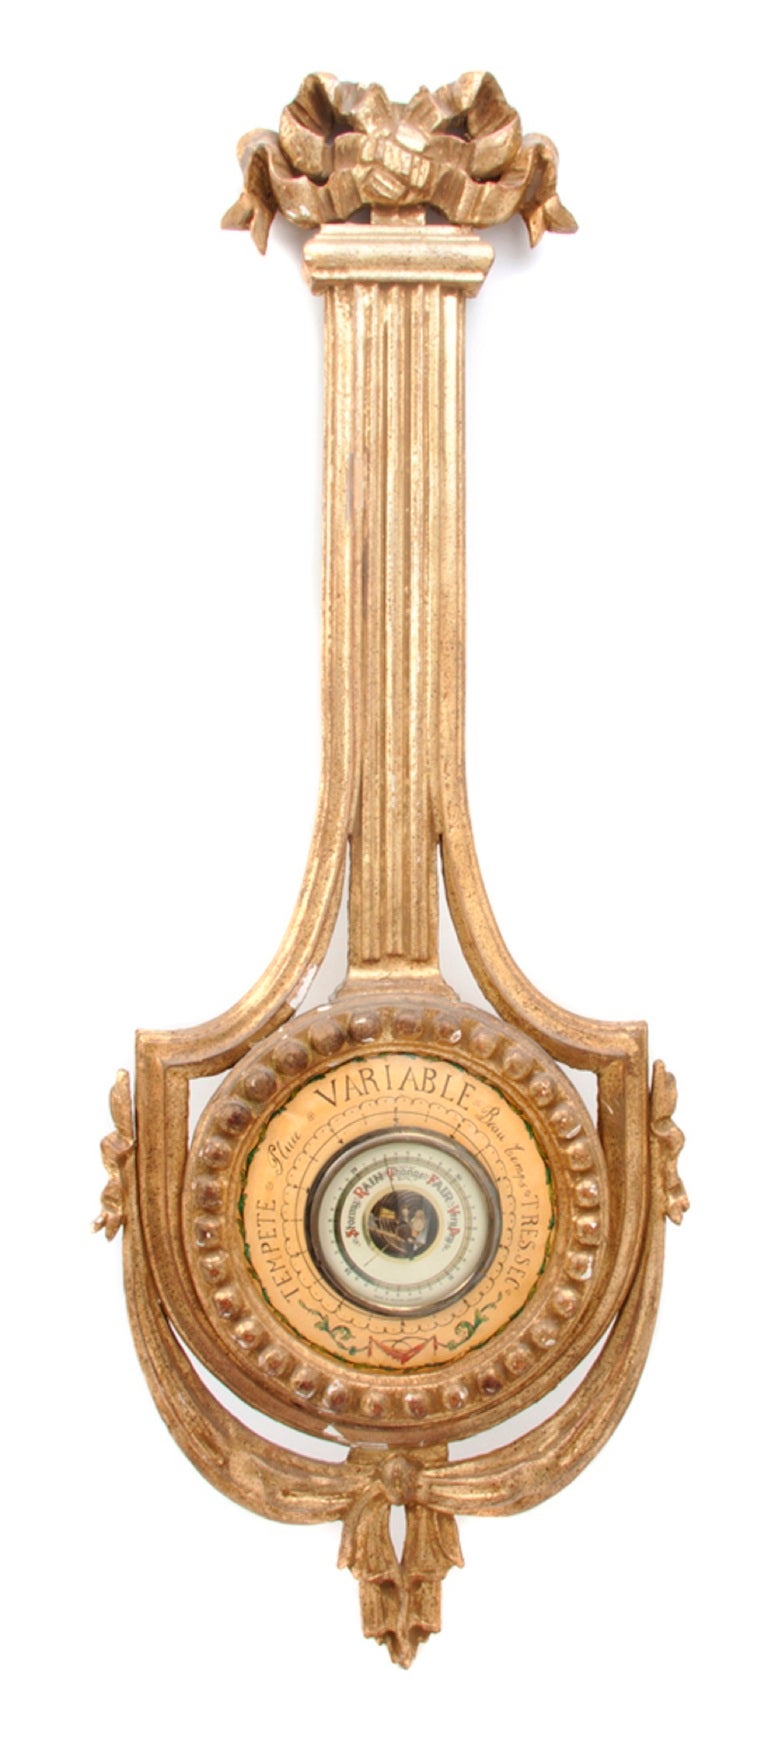 20th century Italian neoclassical giltwood wheel barometer, having a ribbon-tied finial over the fluted frame with the dial flanked by swags.